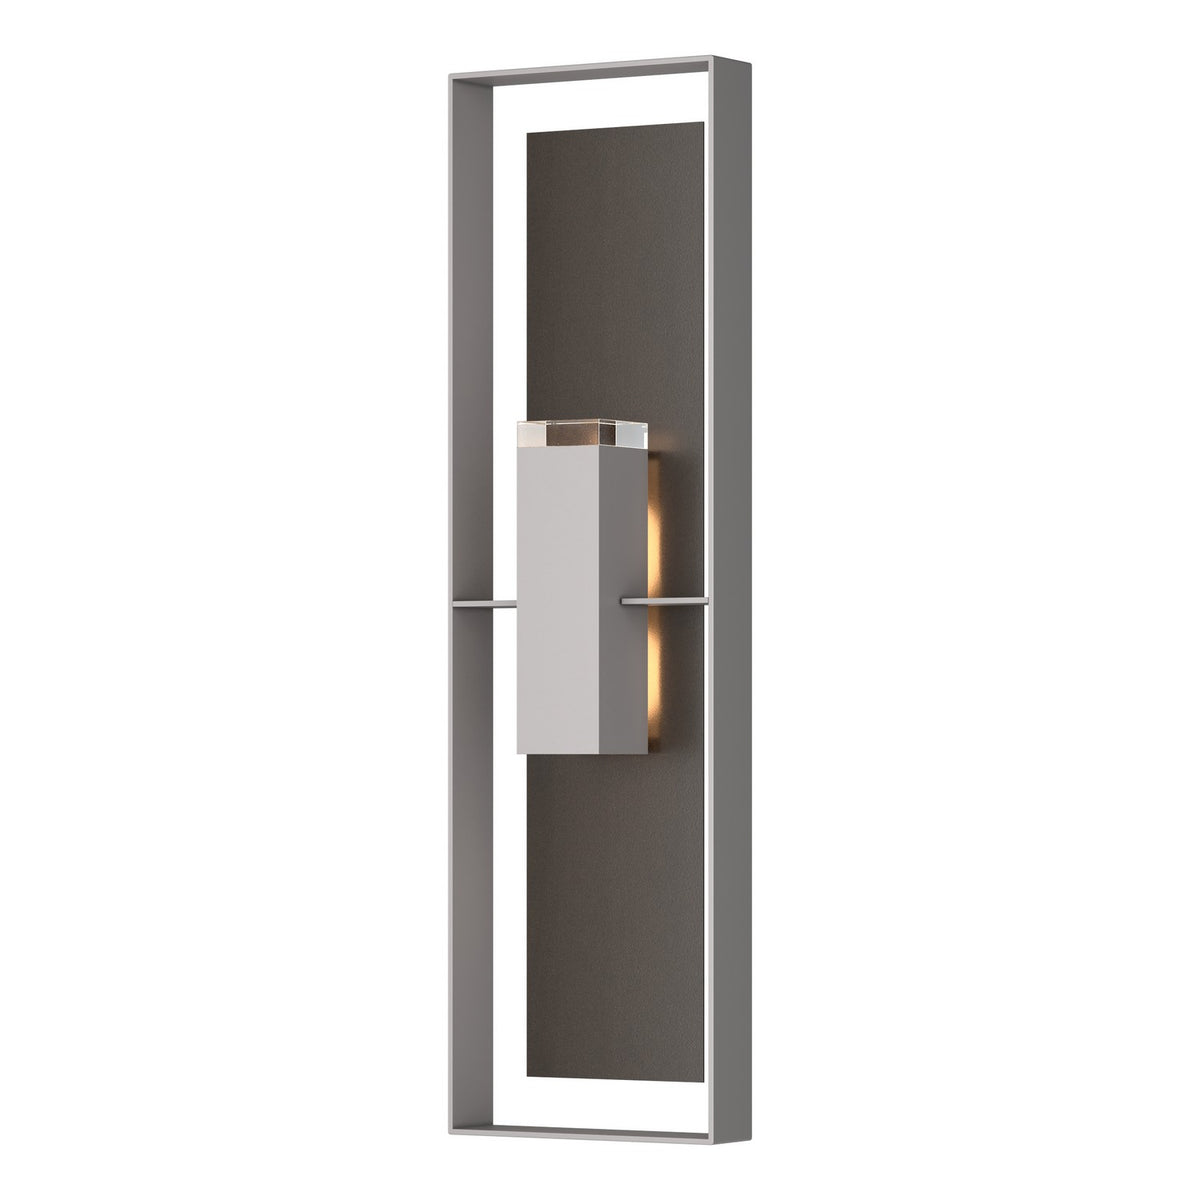 Hubbardton Forge - 302608-SKT-78-14-ZM0736 - Two Light Outdoor Wall Sconce - Shadow Box - Coastal Burnished Steel